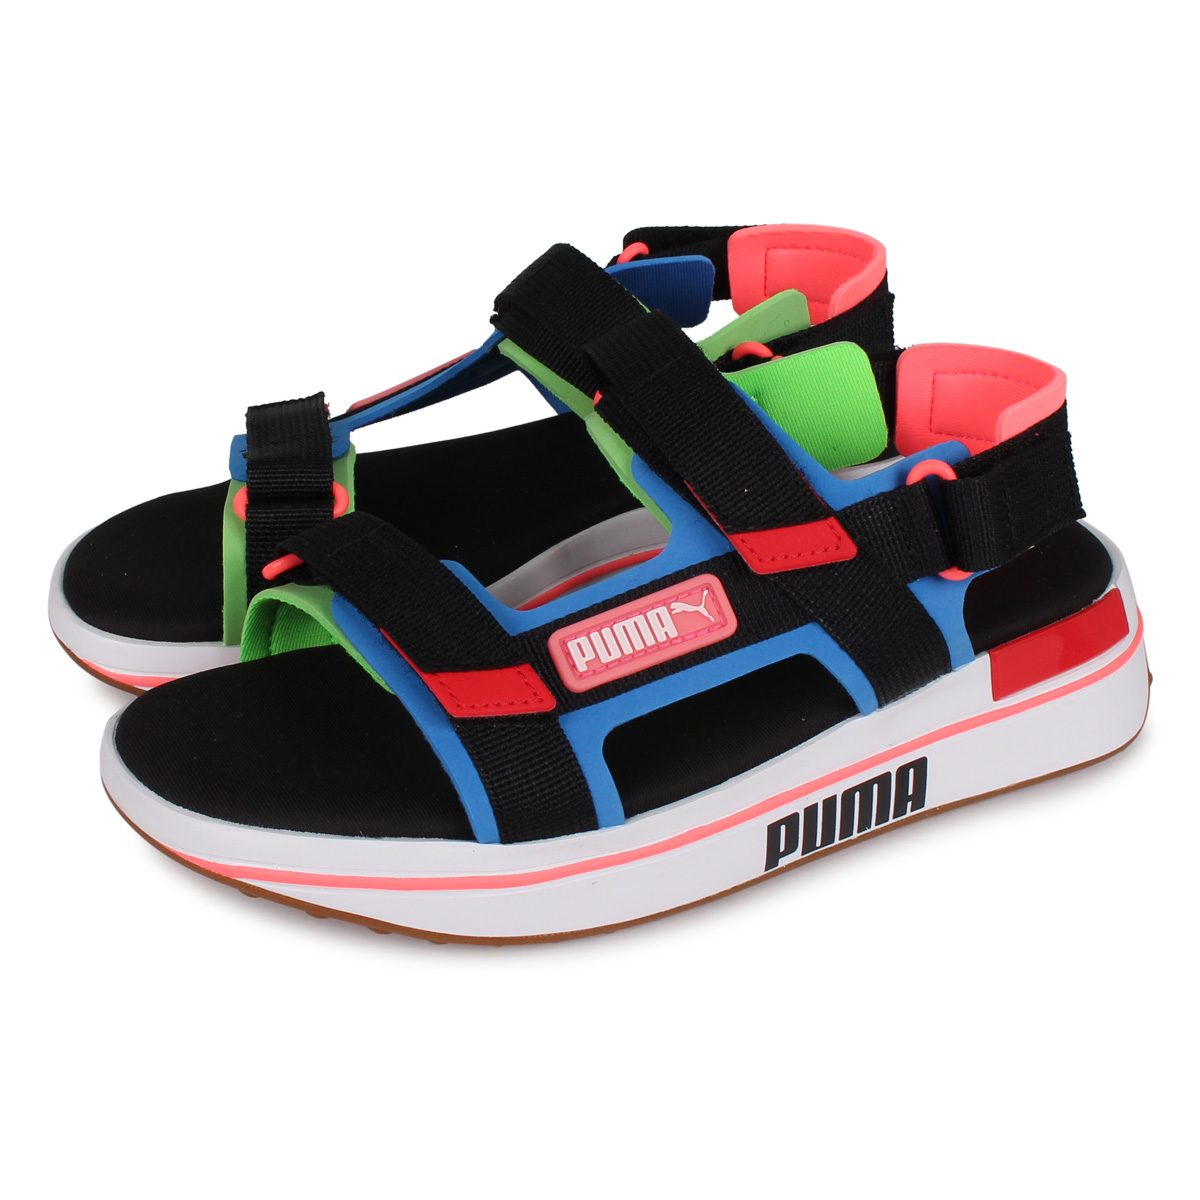 Puma Future Rider Sandals Women Slimited Special Sales And Special Offers Women S Men S Sneakers Sports Shoes Shop Athletic Shoes Online Off 60 Free Shipping Fast Shippment